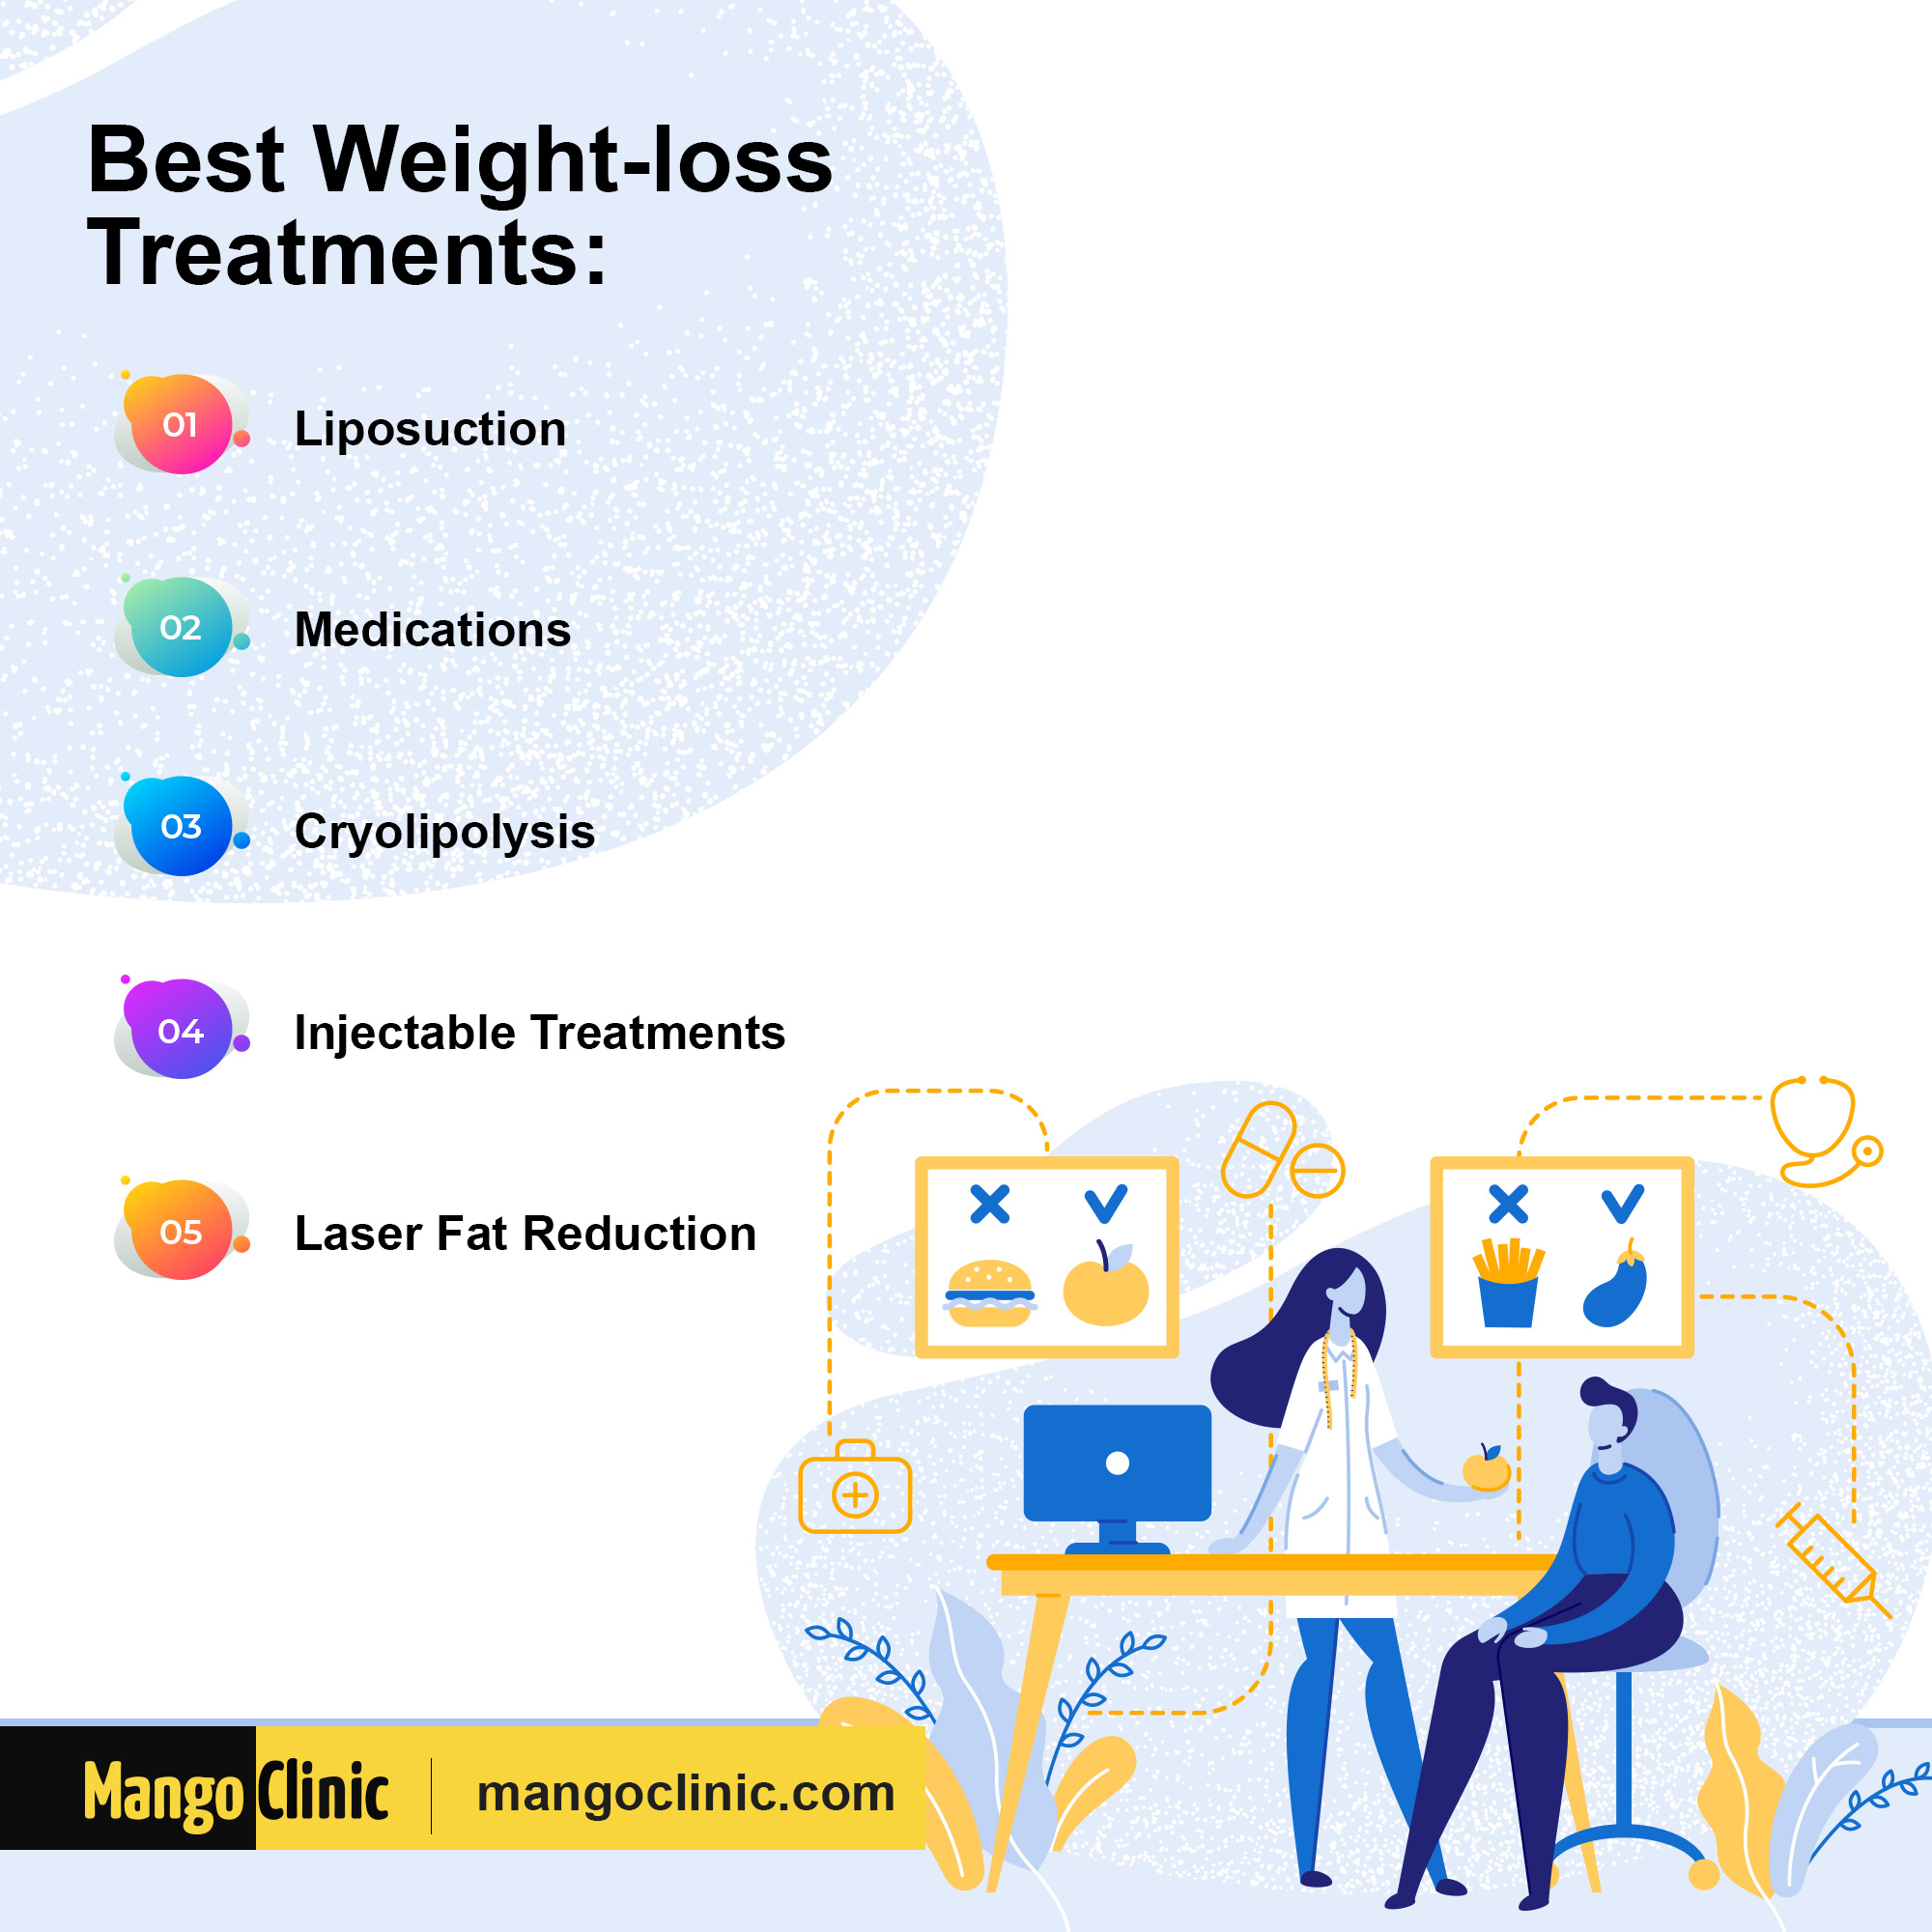 Weight loss treatments